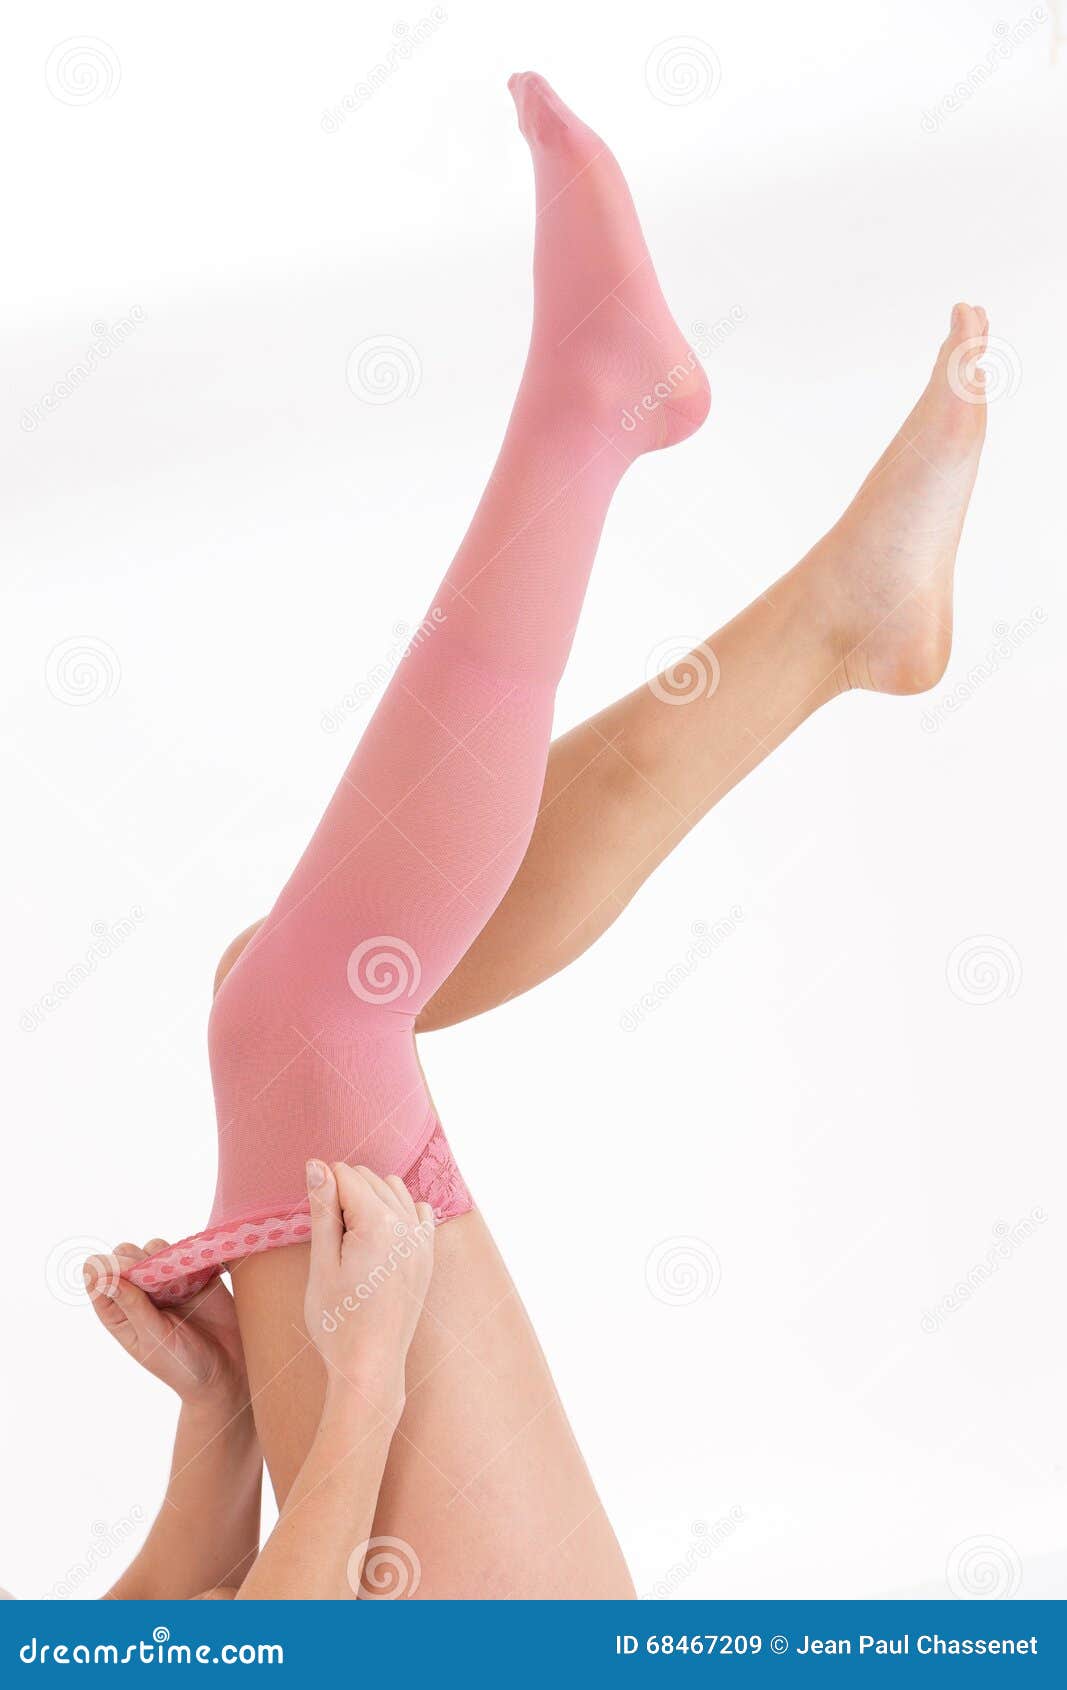 Premium Photo  Female hands of young woman putting on stocking